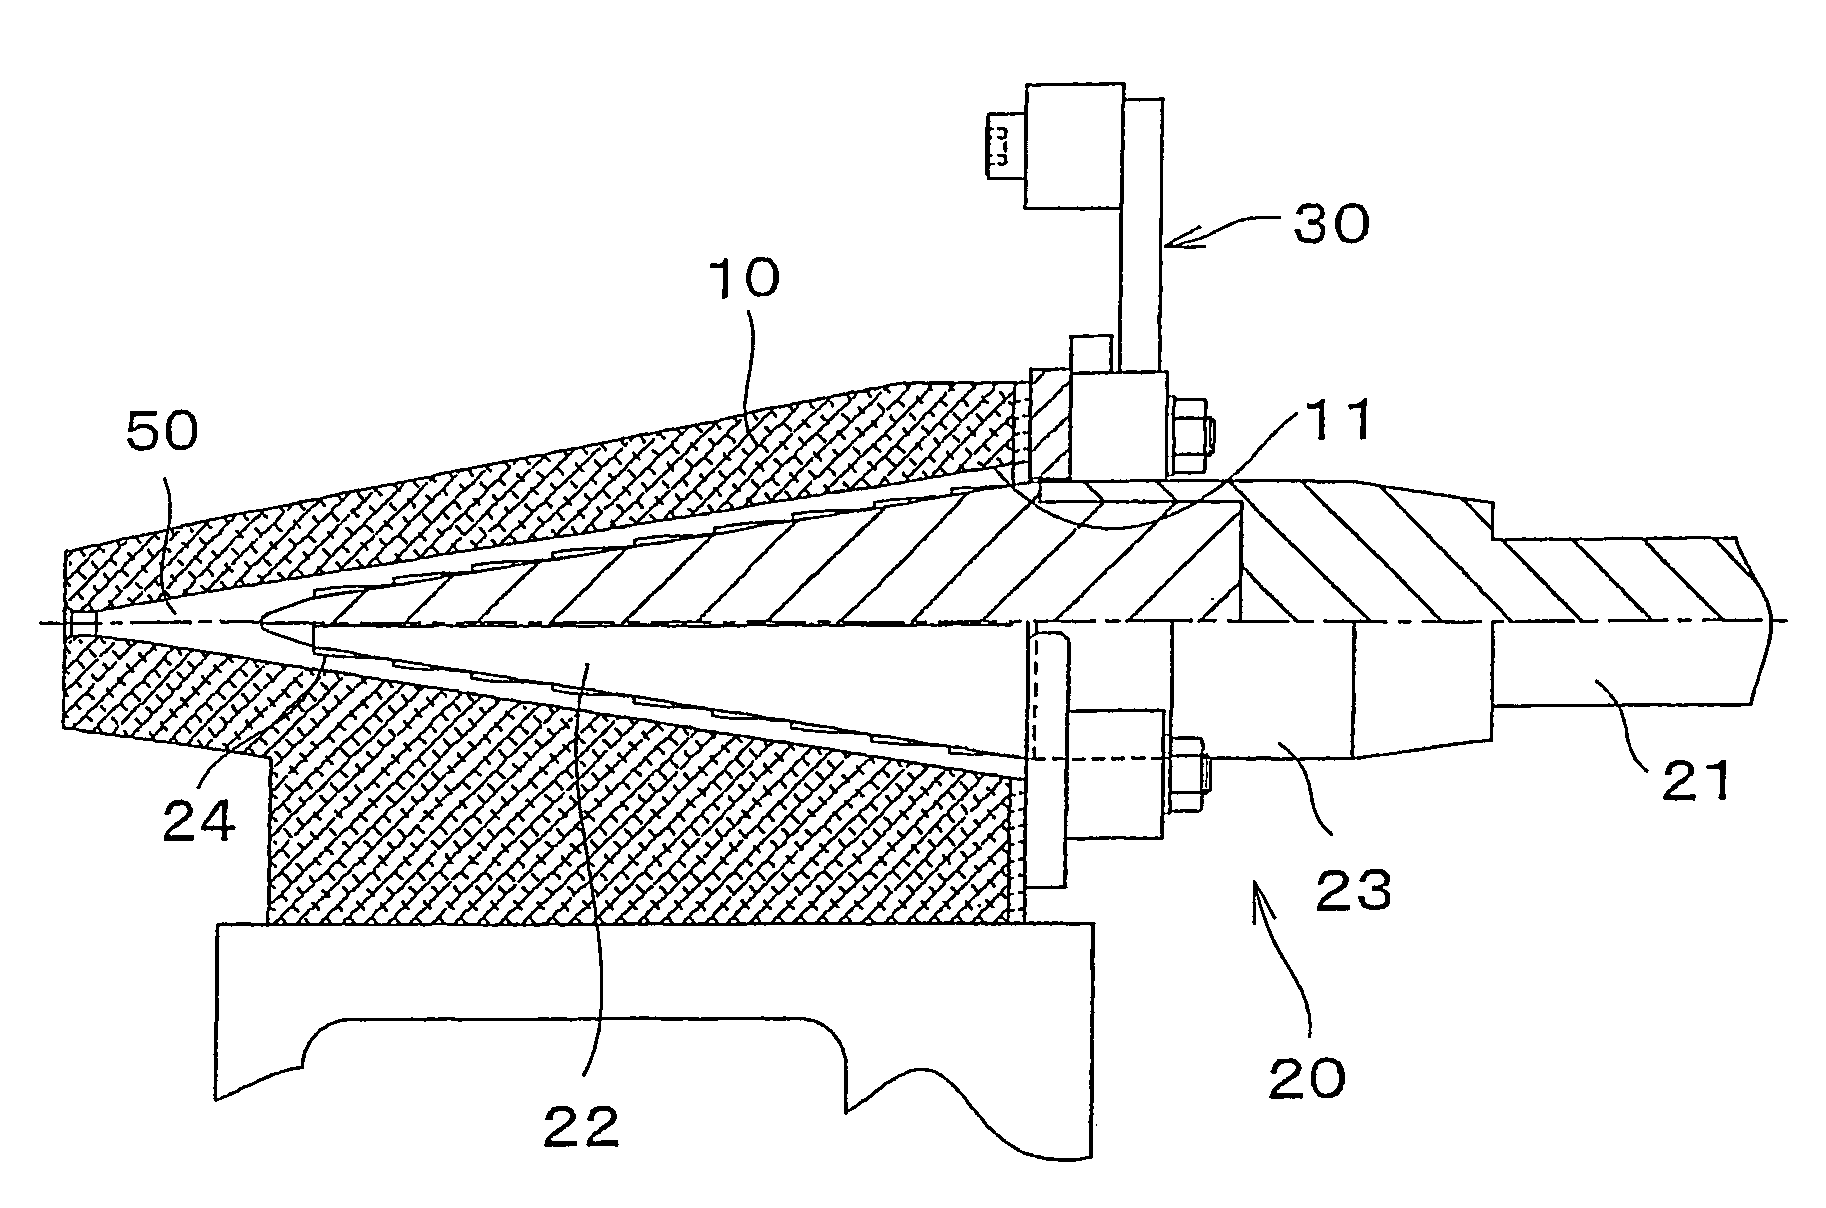 Rolled coned manufacturing apparatus